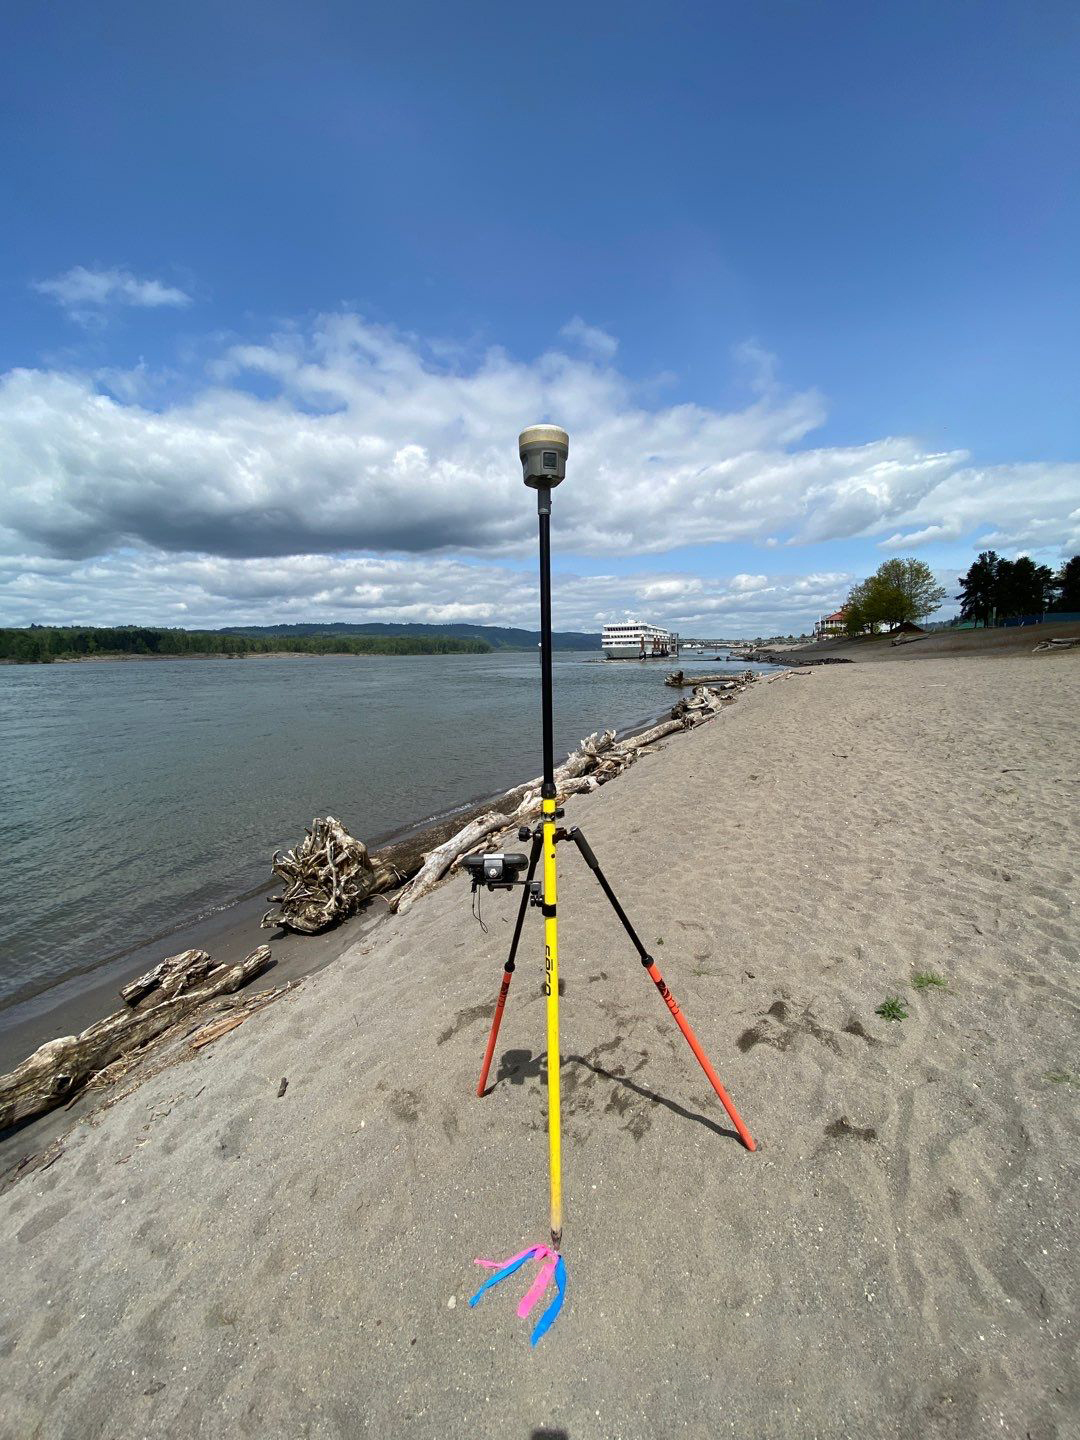 Hydrographic surveying equipment set up on a sandy shore next to a body of water